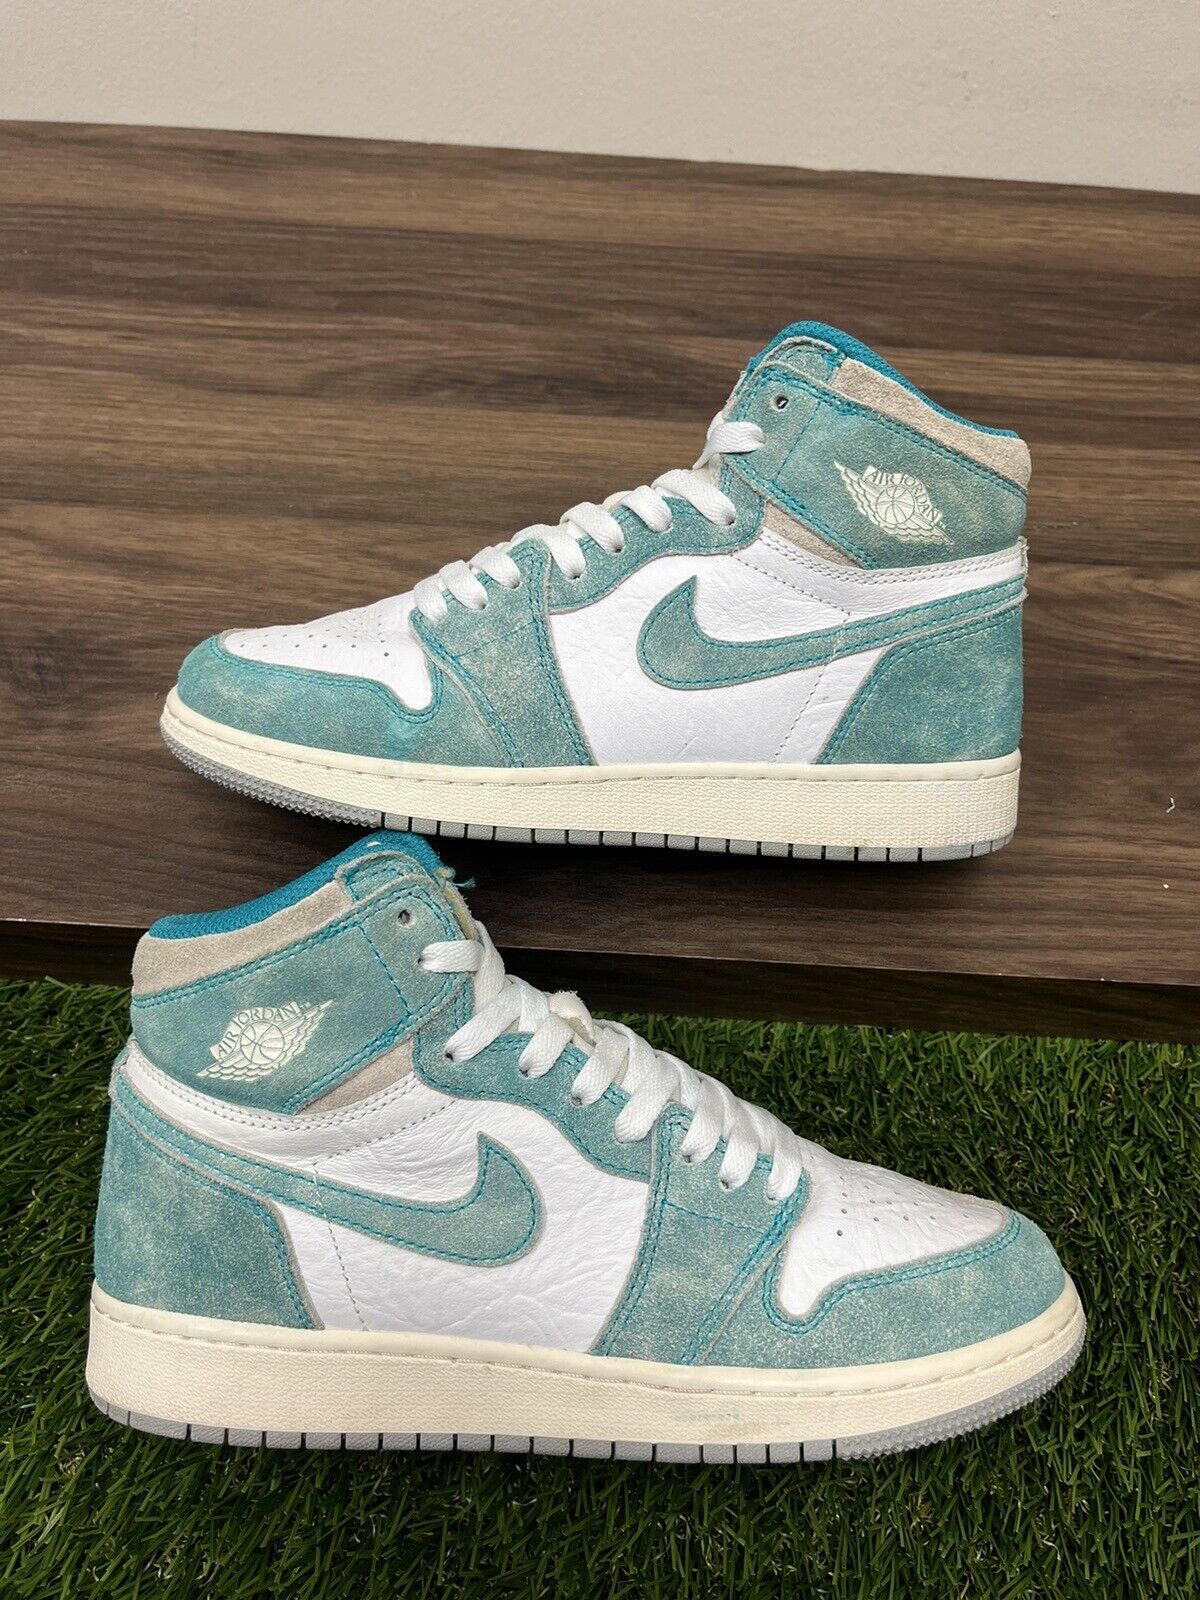 Air Jordan 1 High OG Turbo Green GS - Size 6.5Y - - Used - Youth Shoe